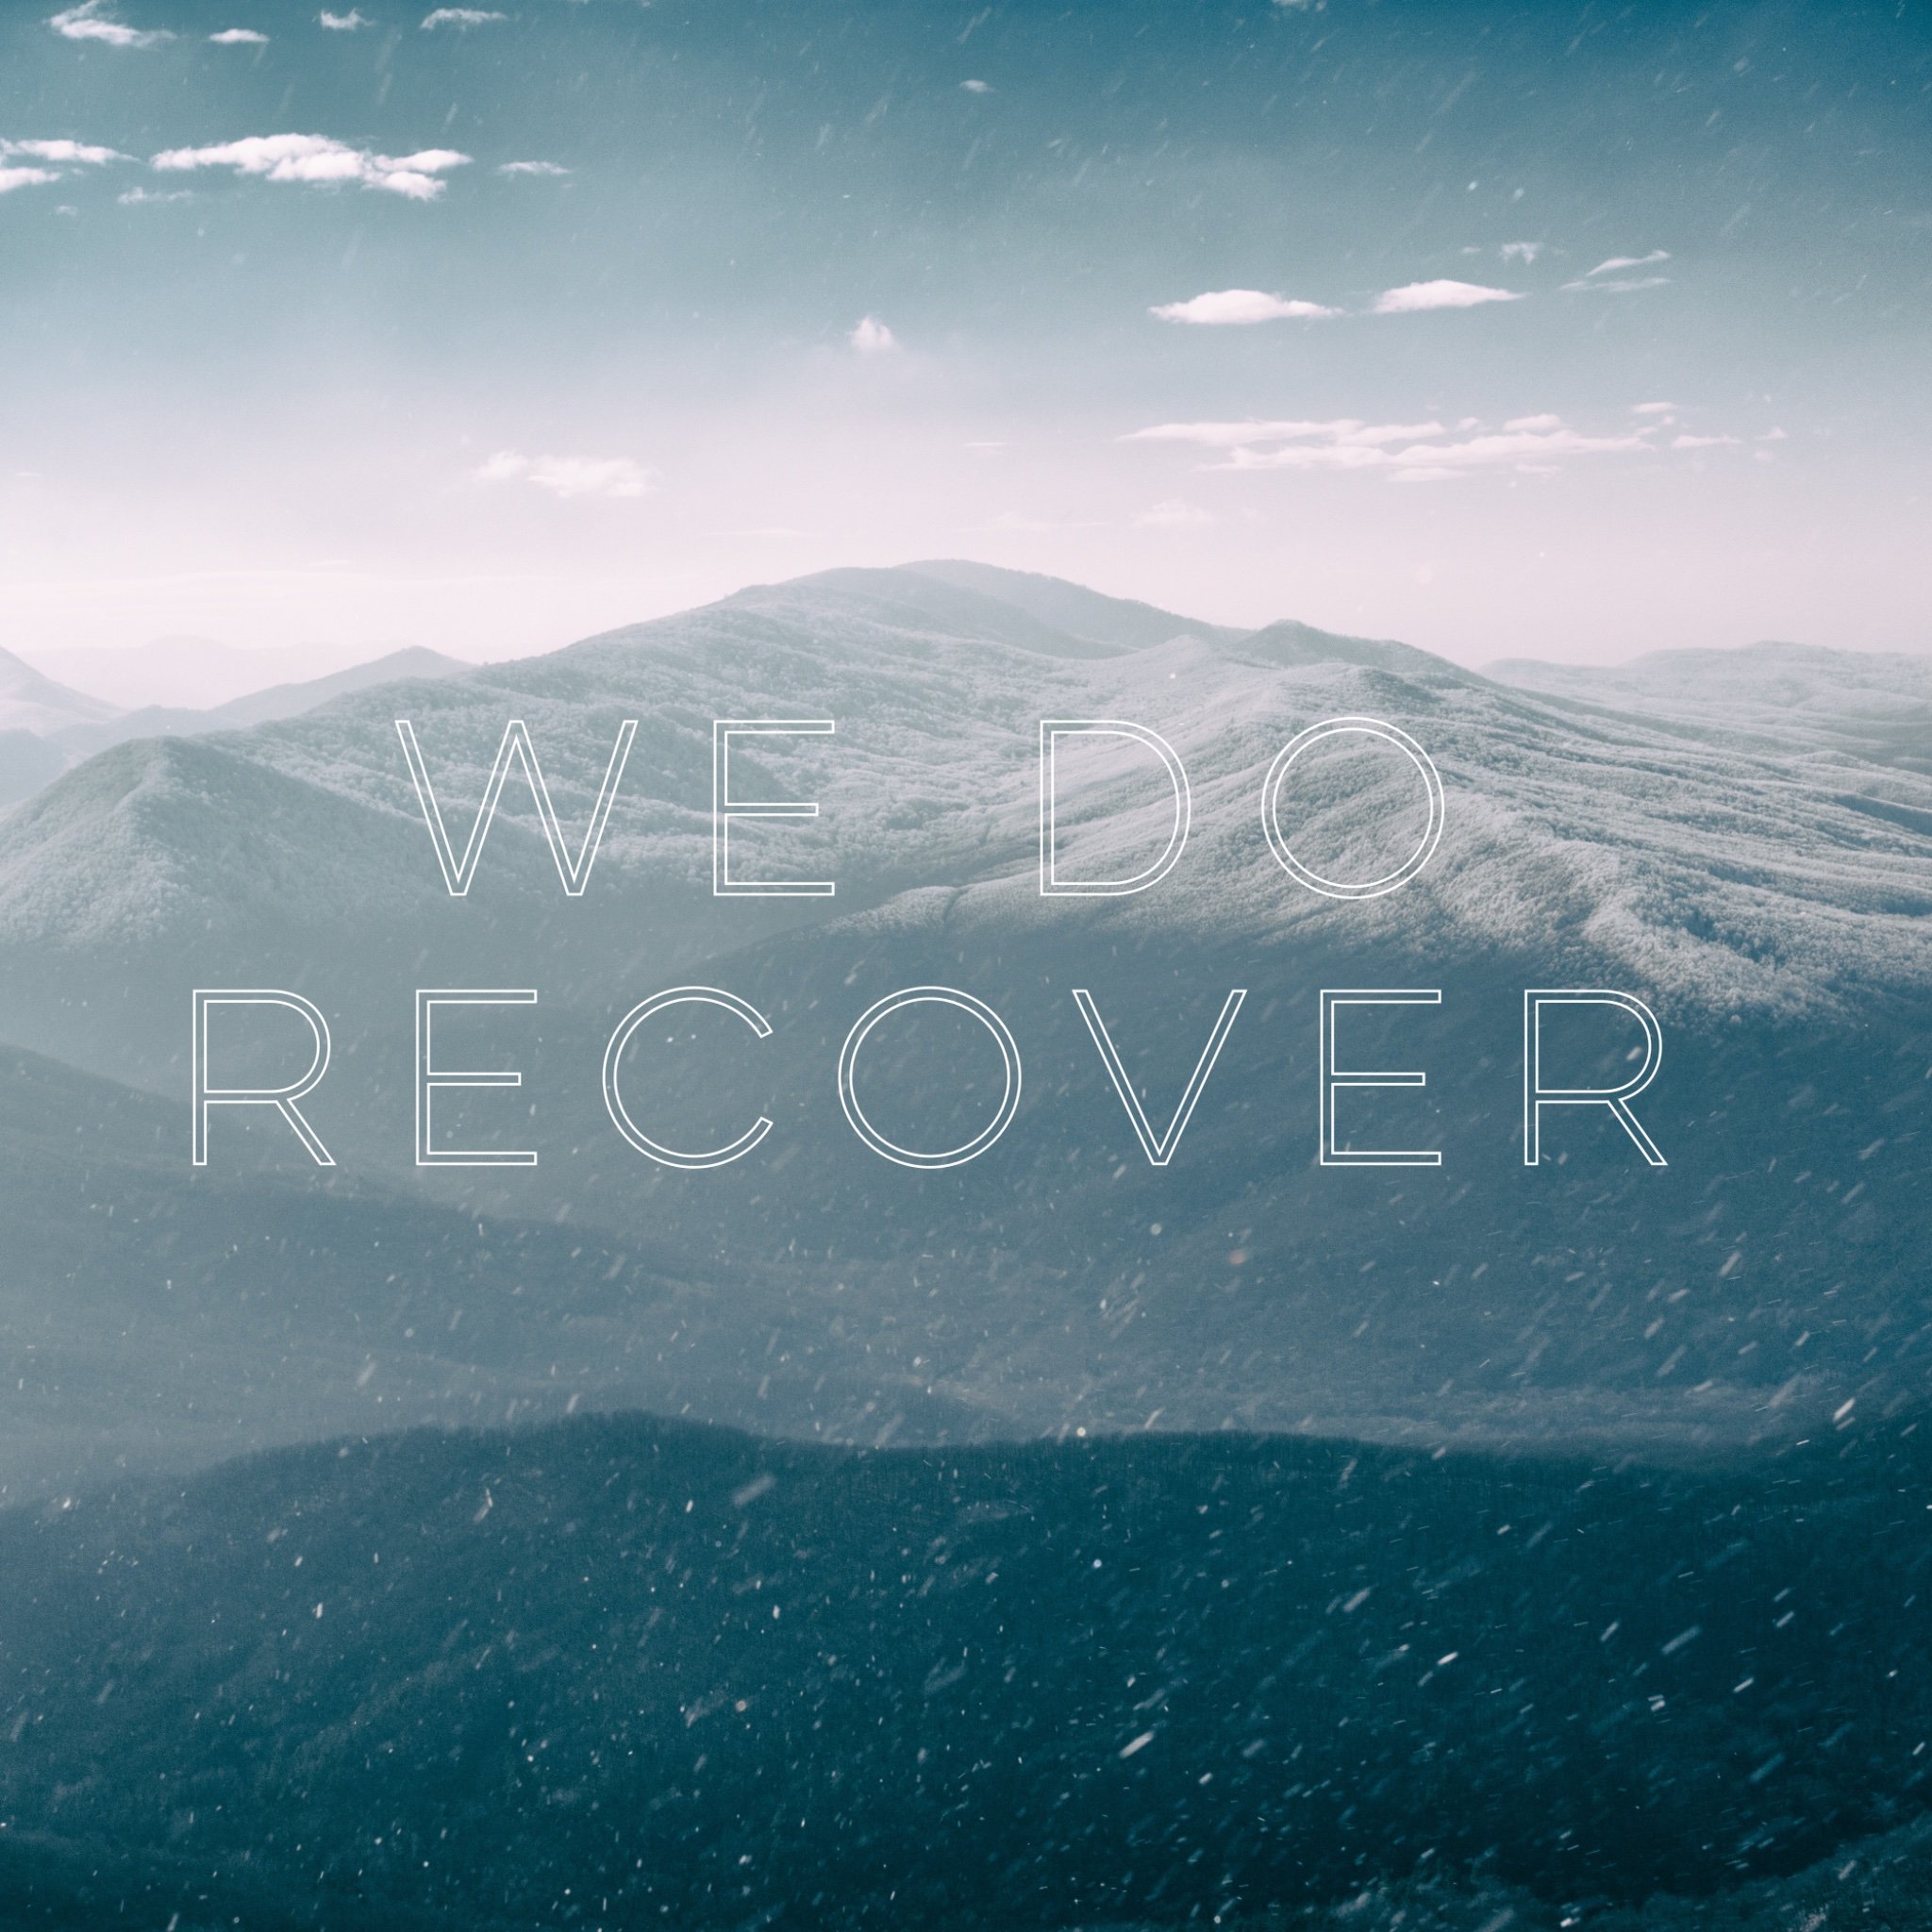 The lie is dead... we do recover. #getinthesolution